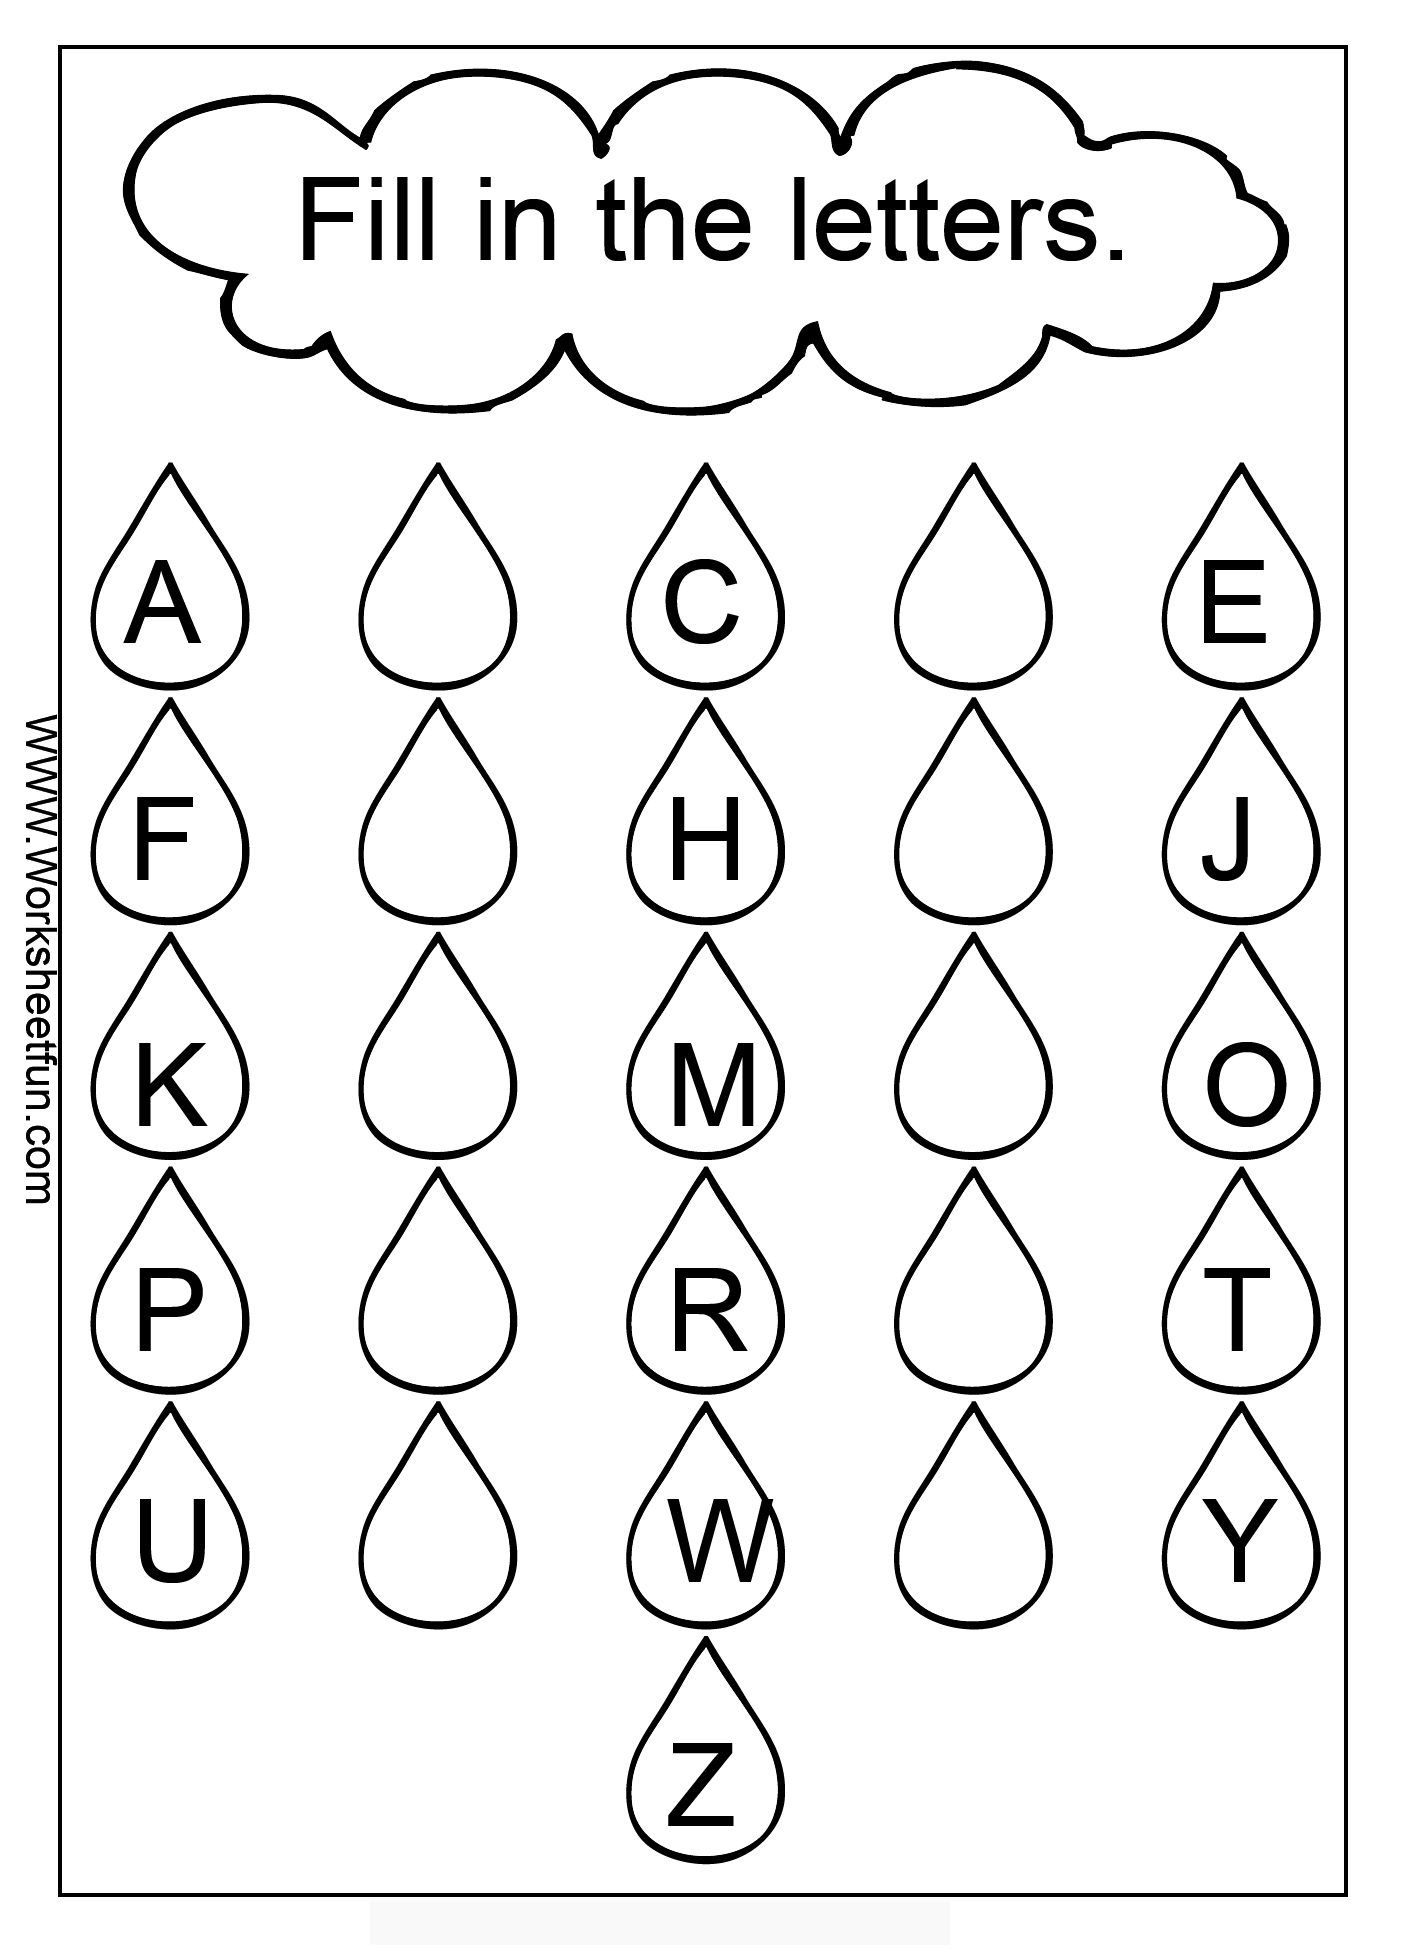 Missing Uppercase Letters Missing Capital Letters FREE Printable 